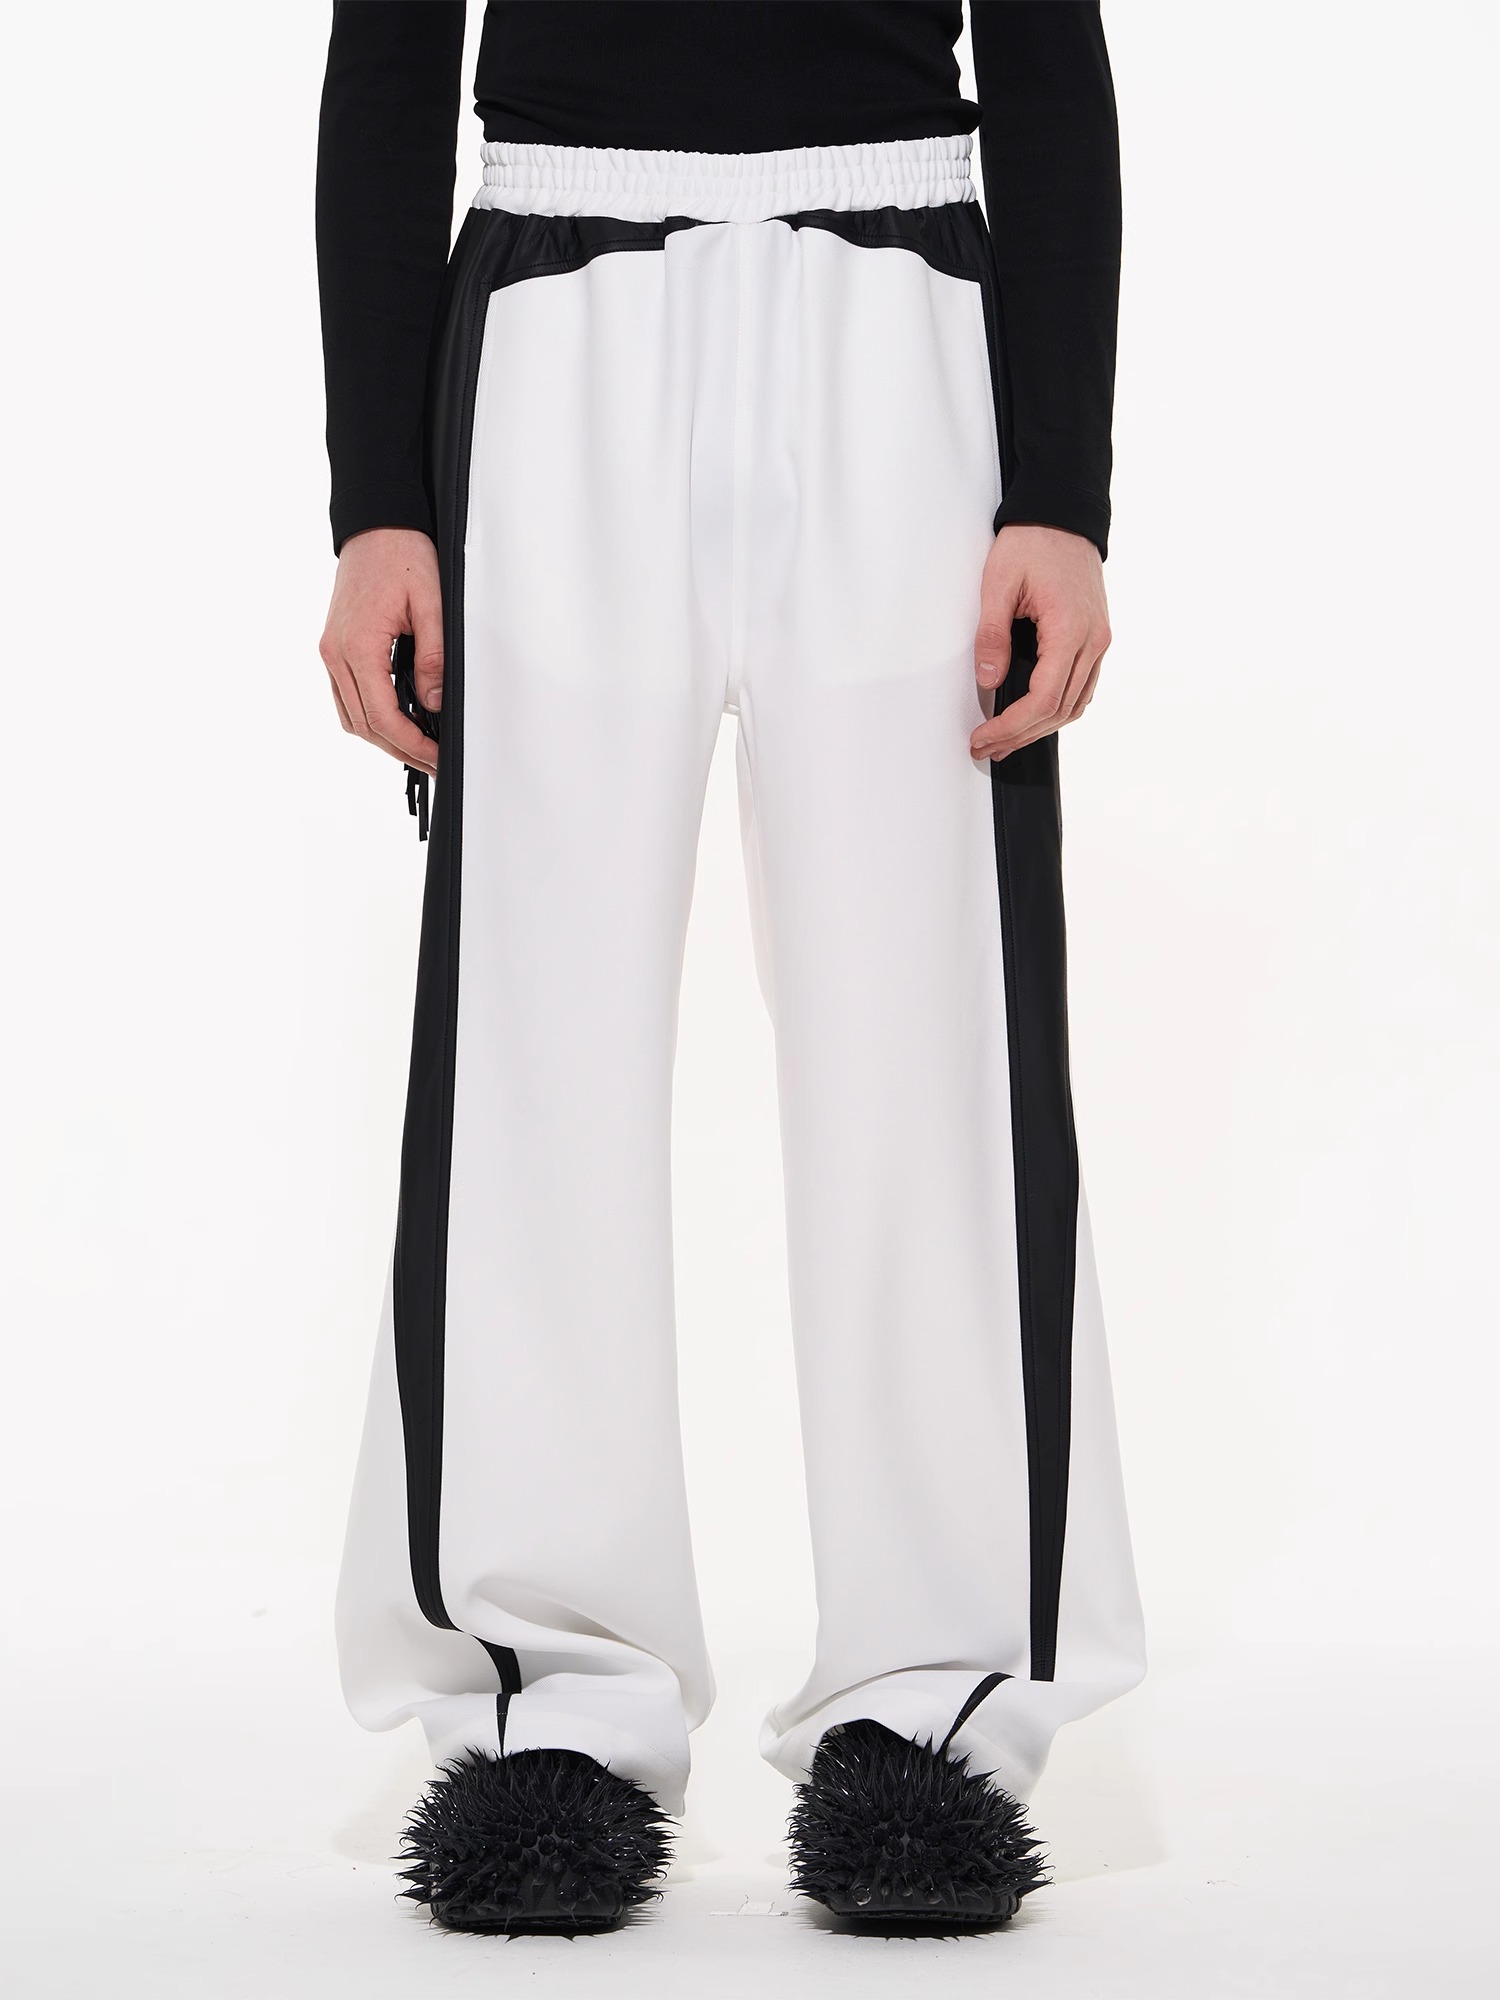 BLINDNOPLAN 24SS Tassel Patchwork 'E' Style Sports Pants [Limited]